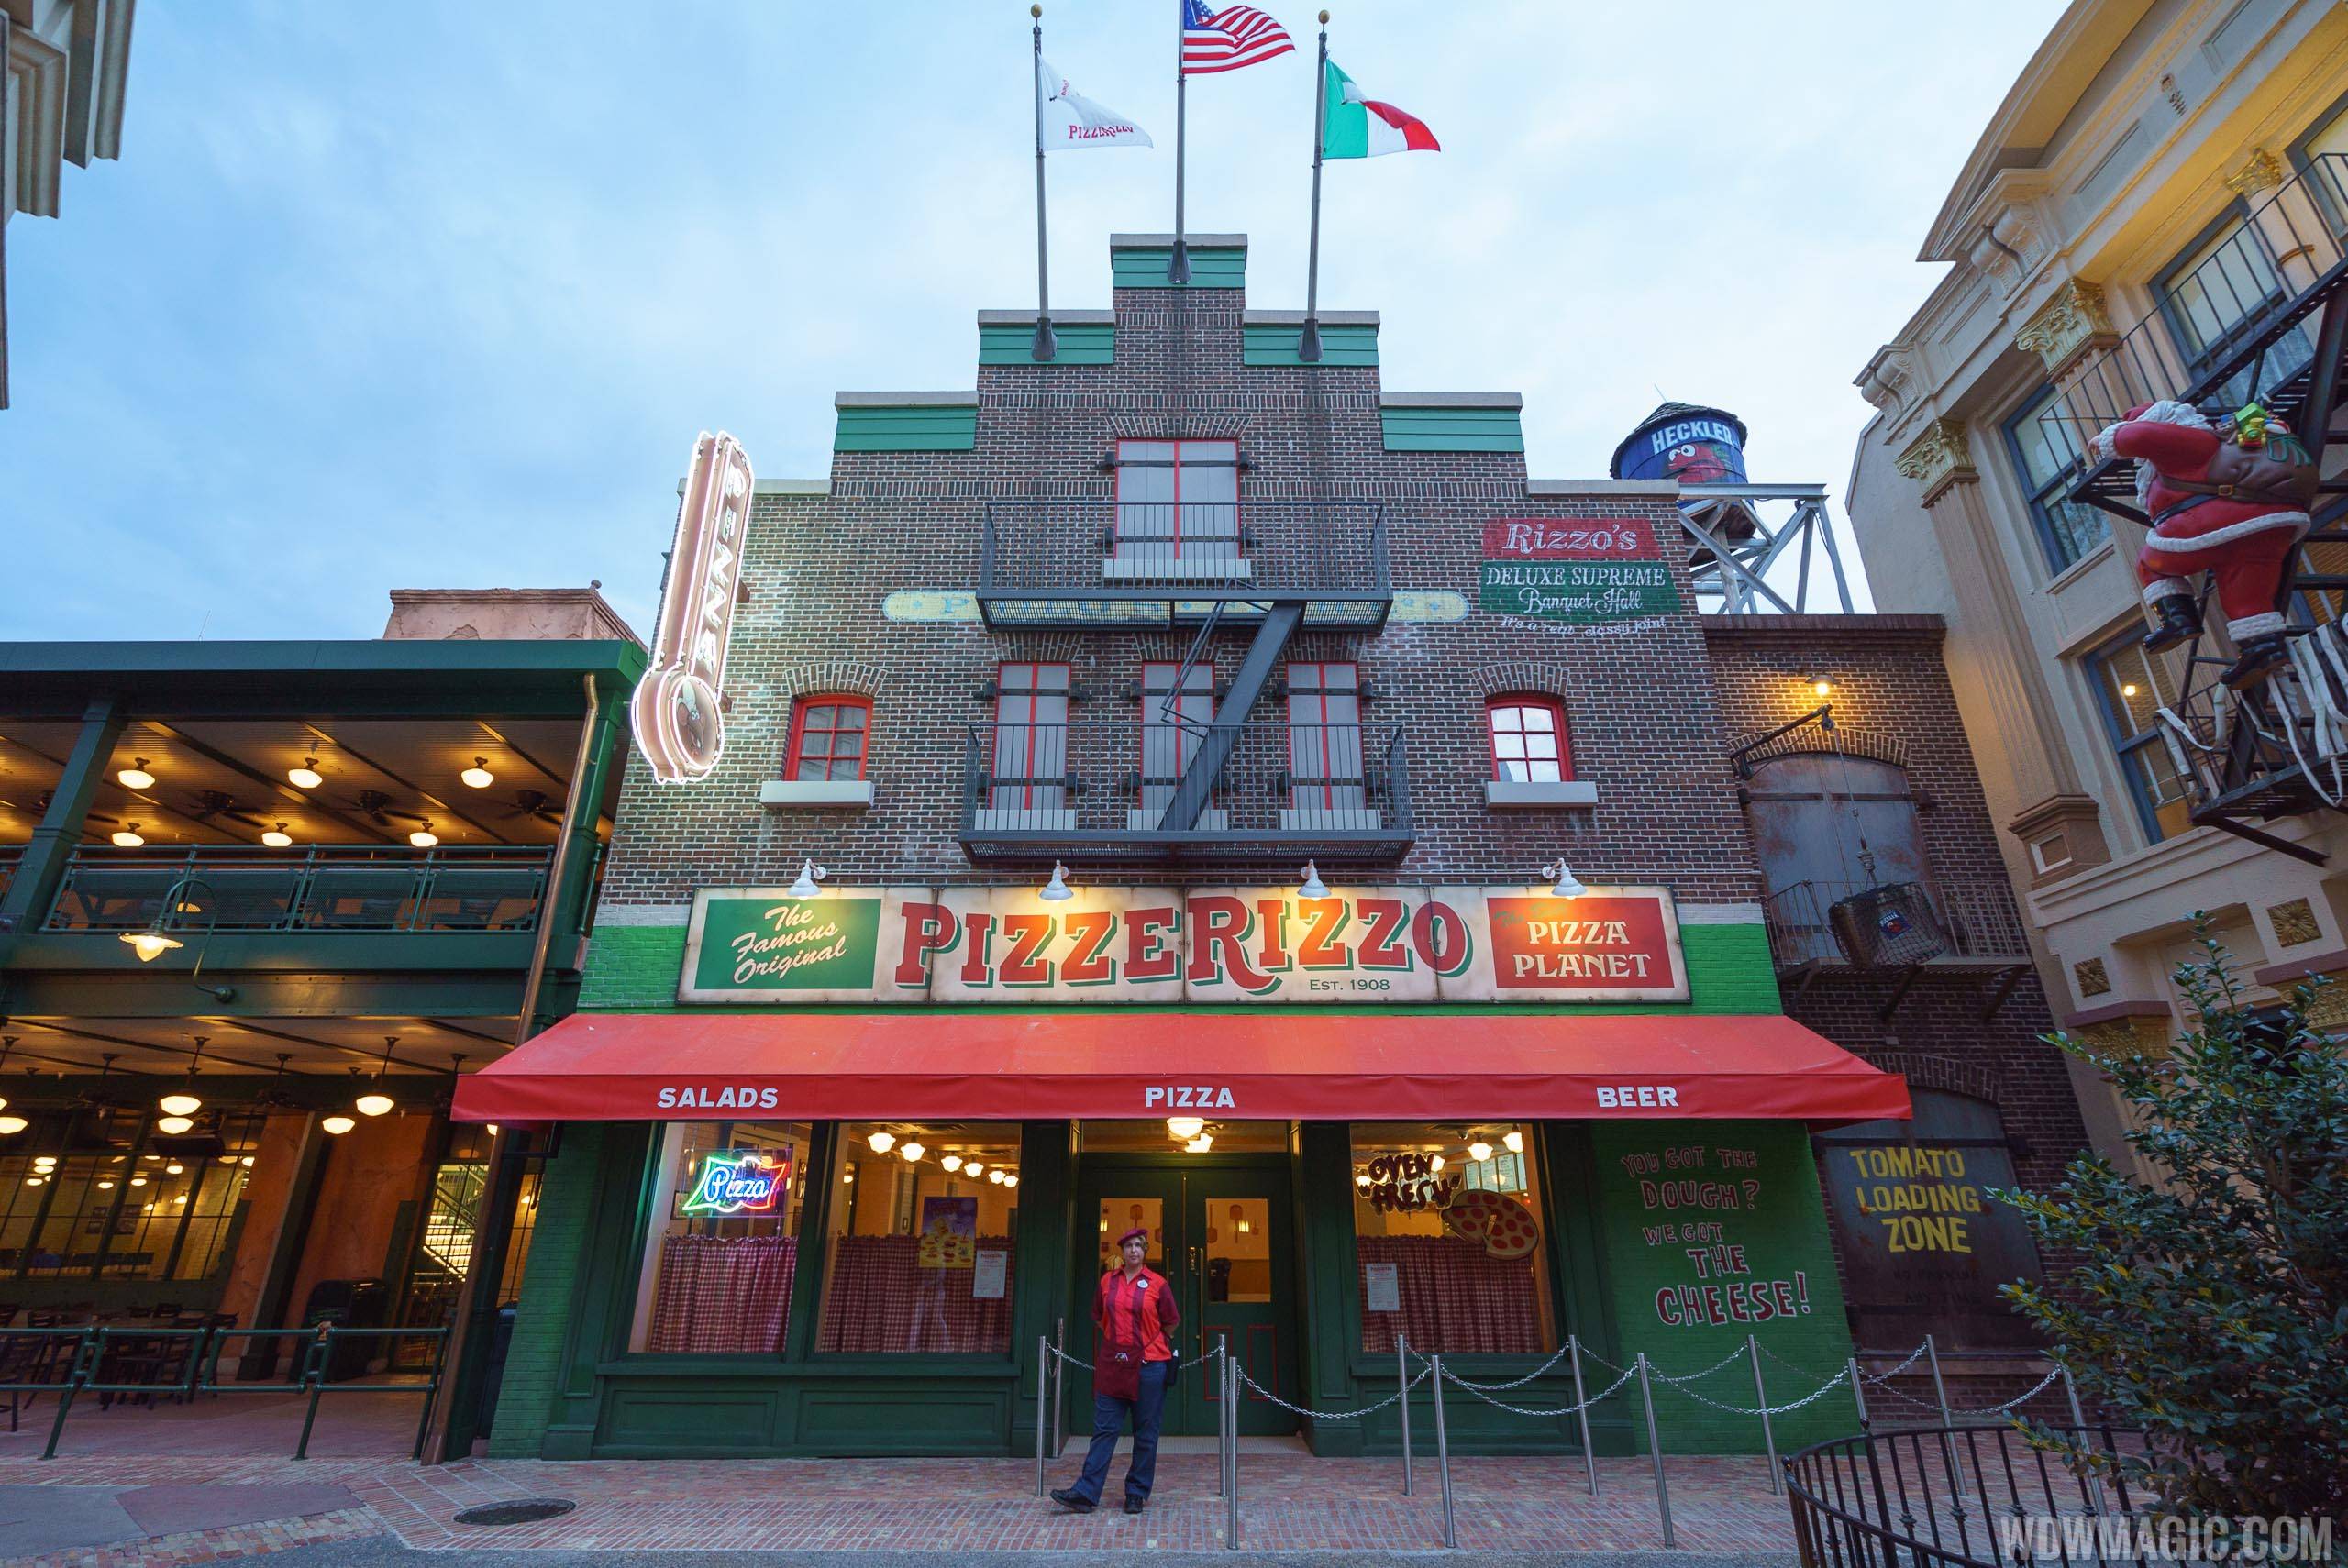 Pizze Rizzo at Disney's Hollywood Studios